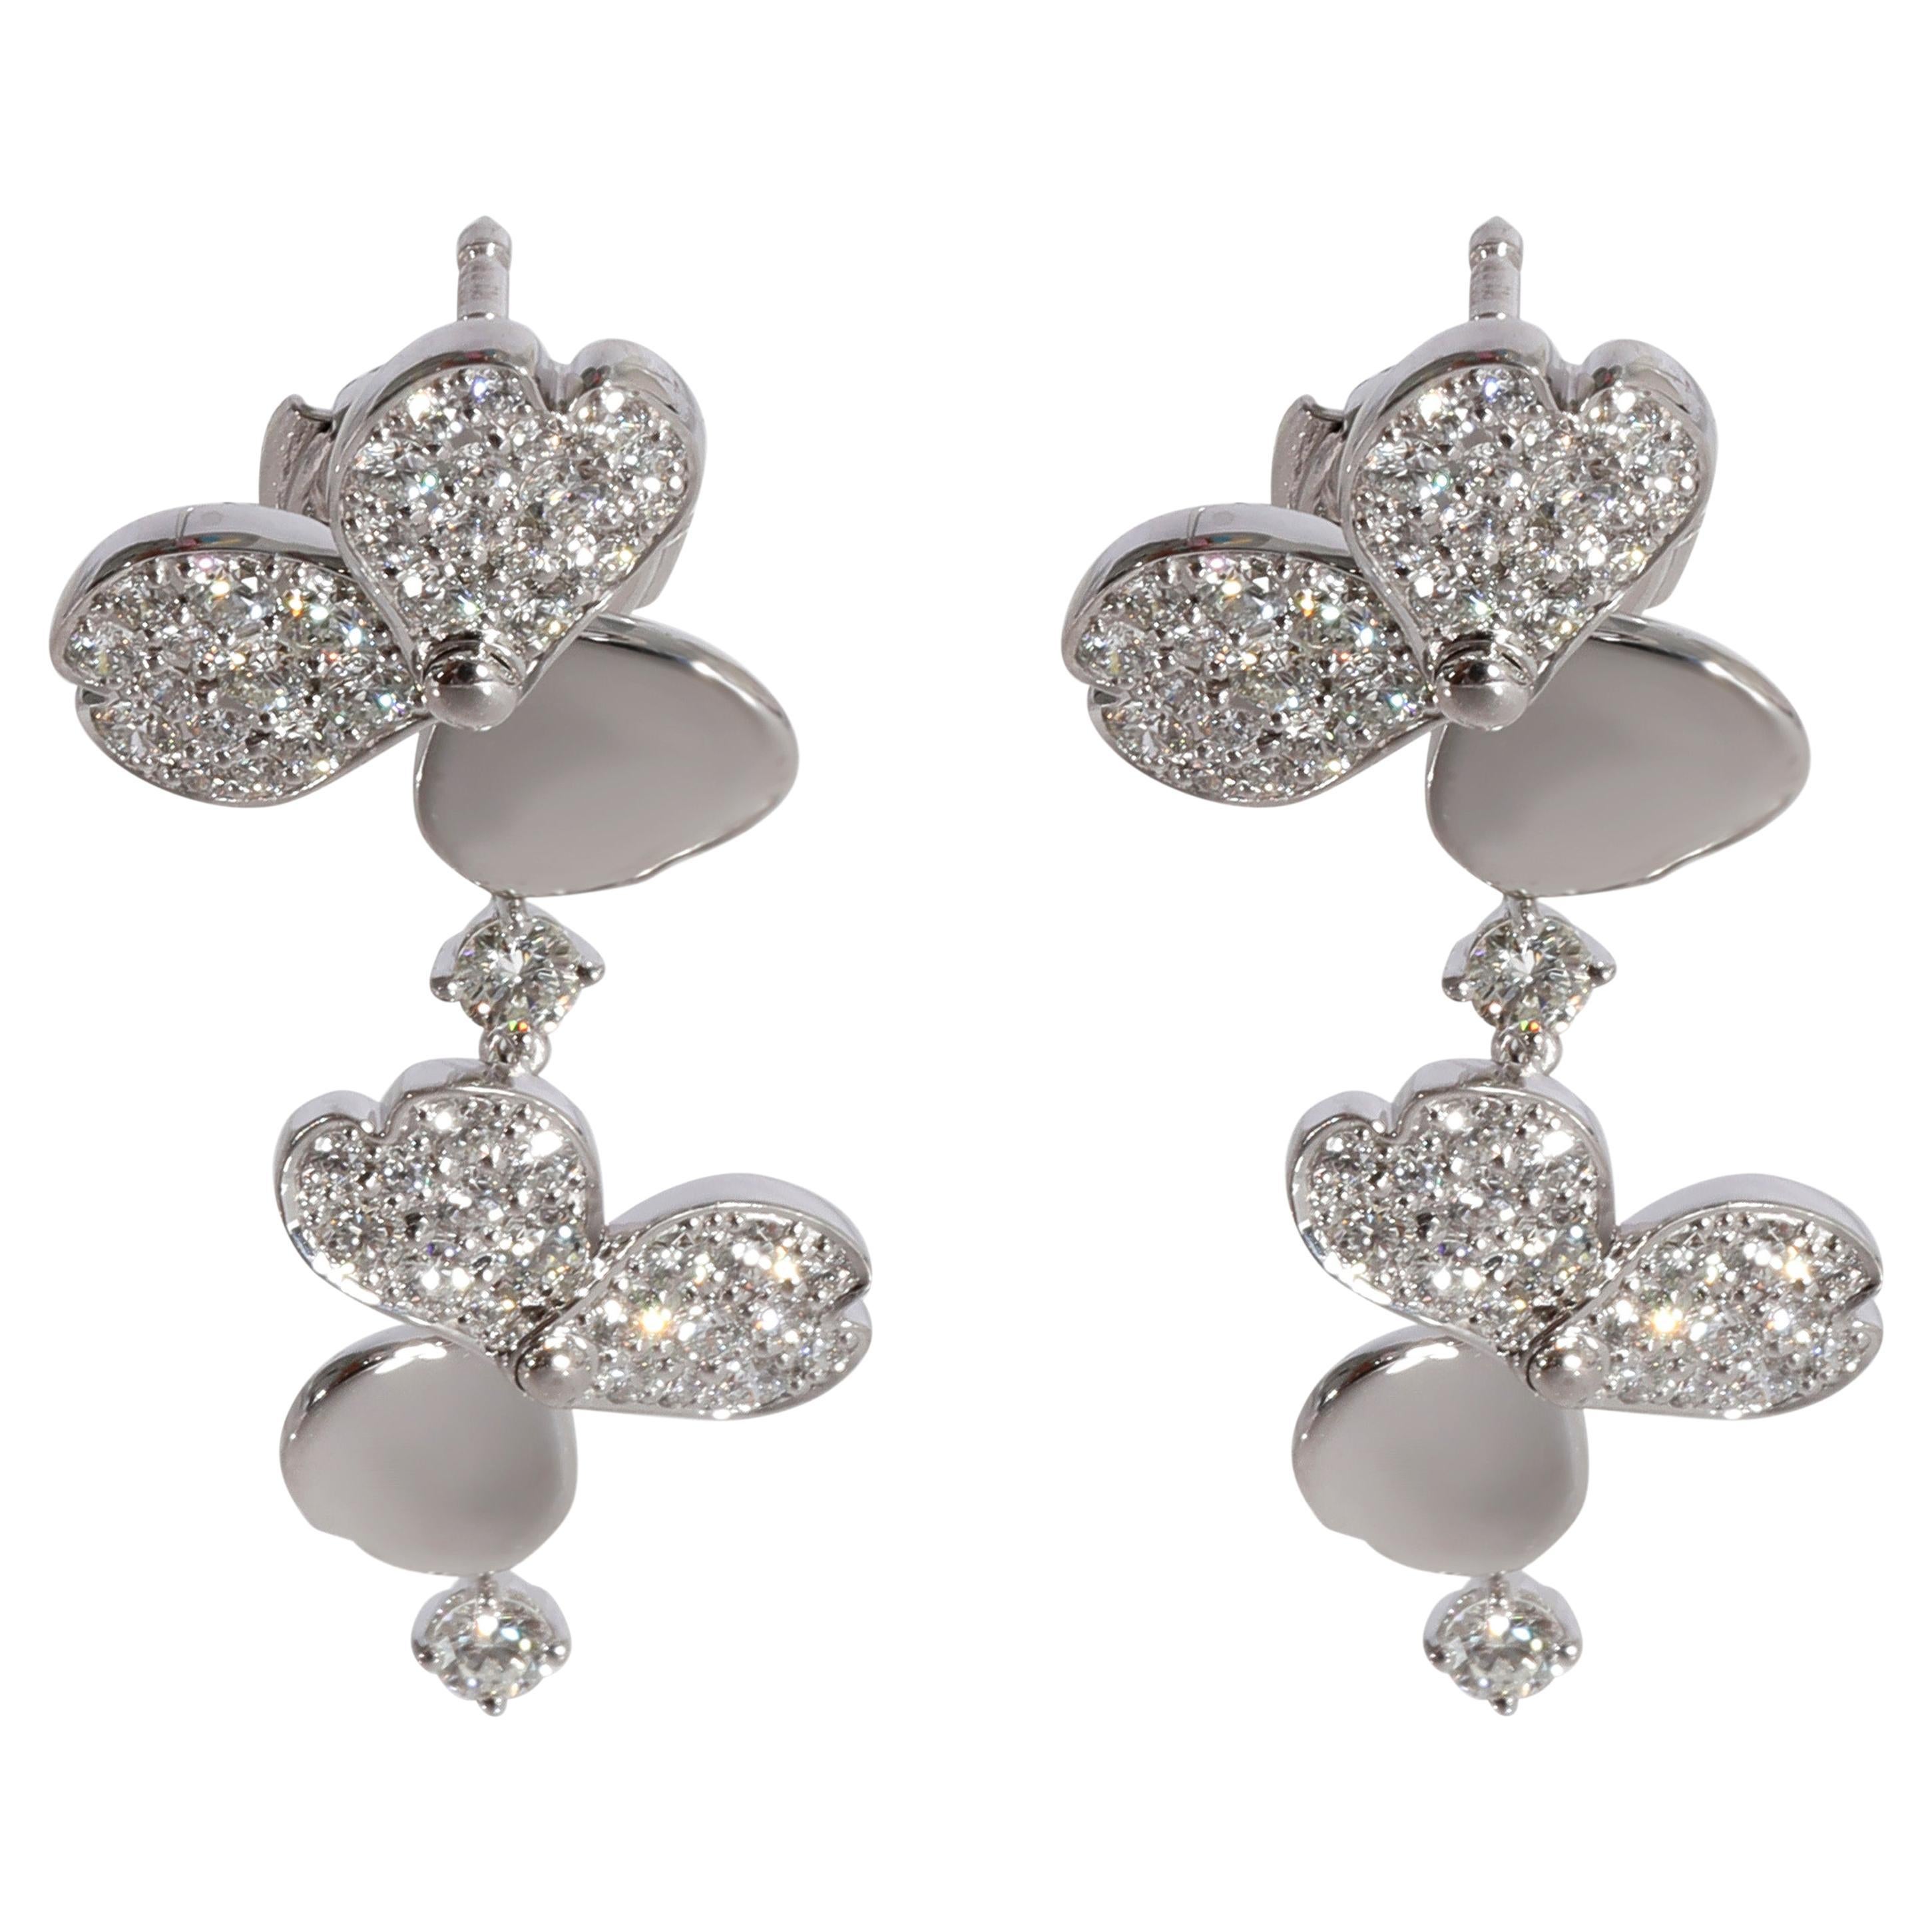 Pre-Owned & Co Jomashop.com Accessories Jewelry Earrings Studs Diamond Stud Earring in 950 Platinum H VVS2 0.82 CTW 